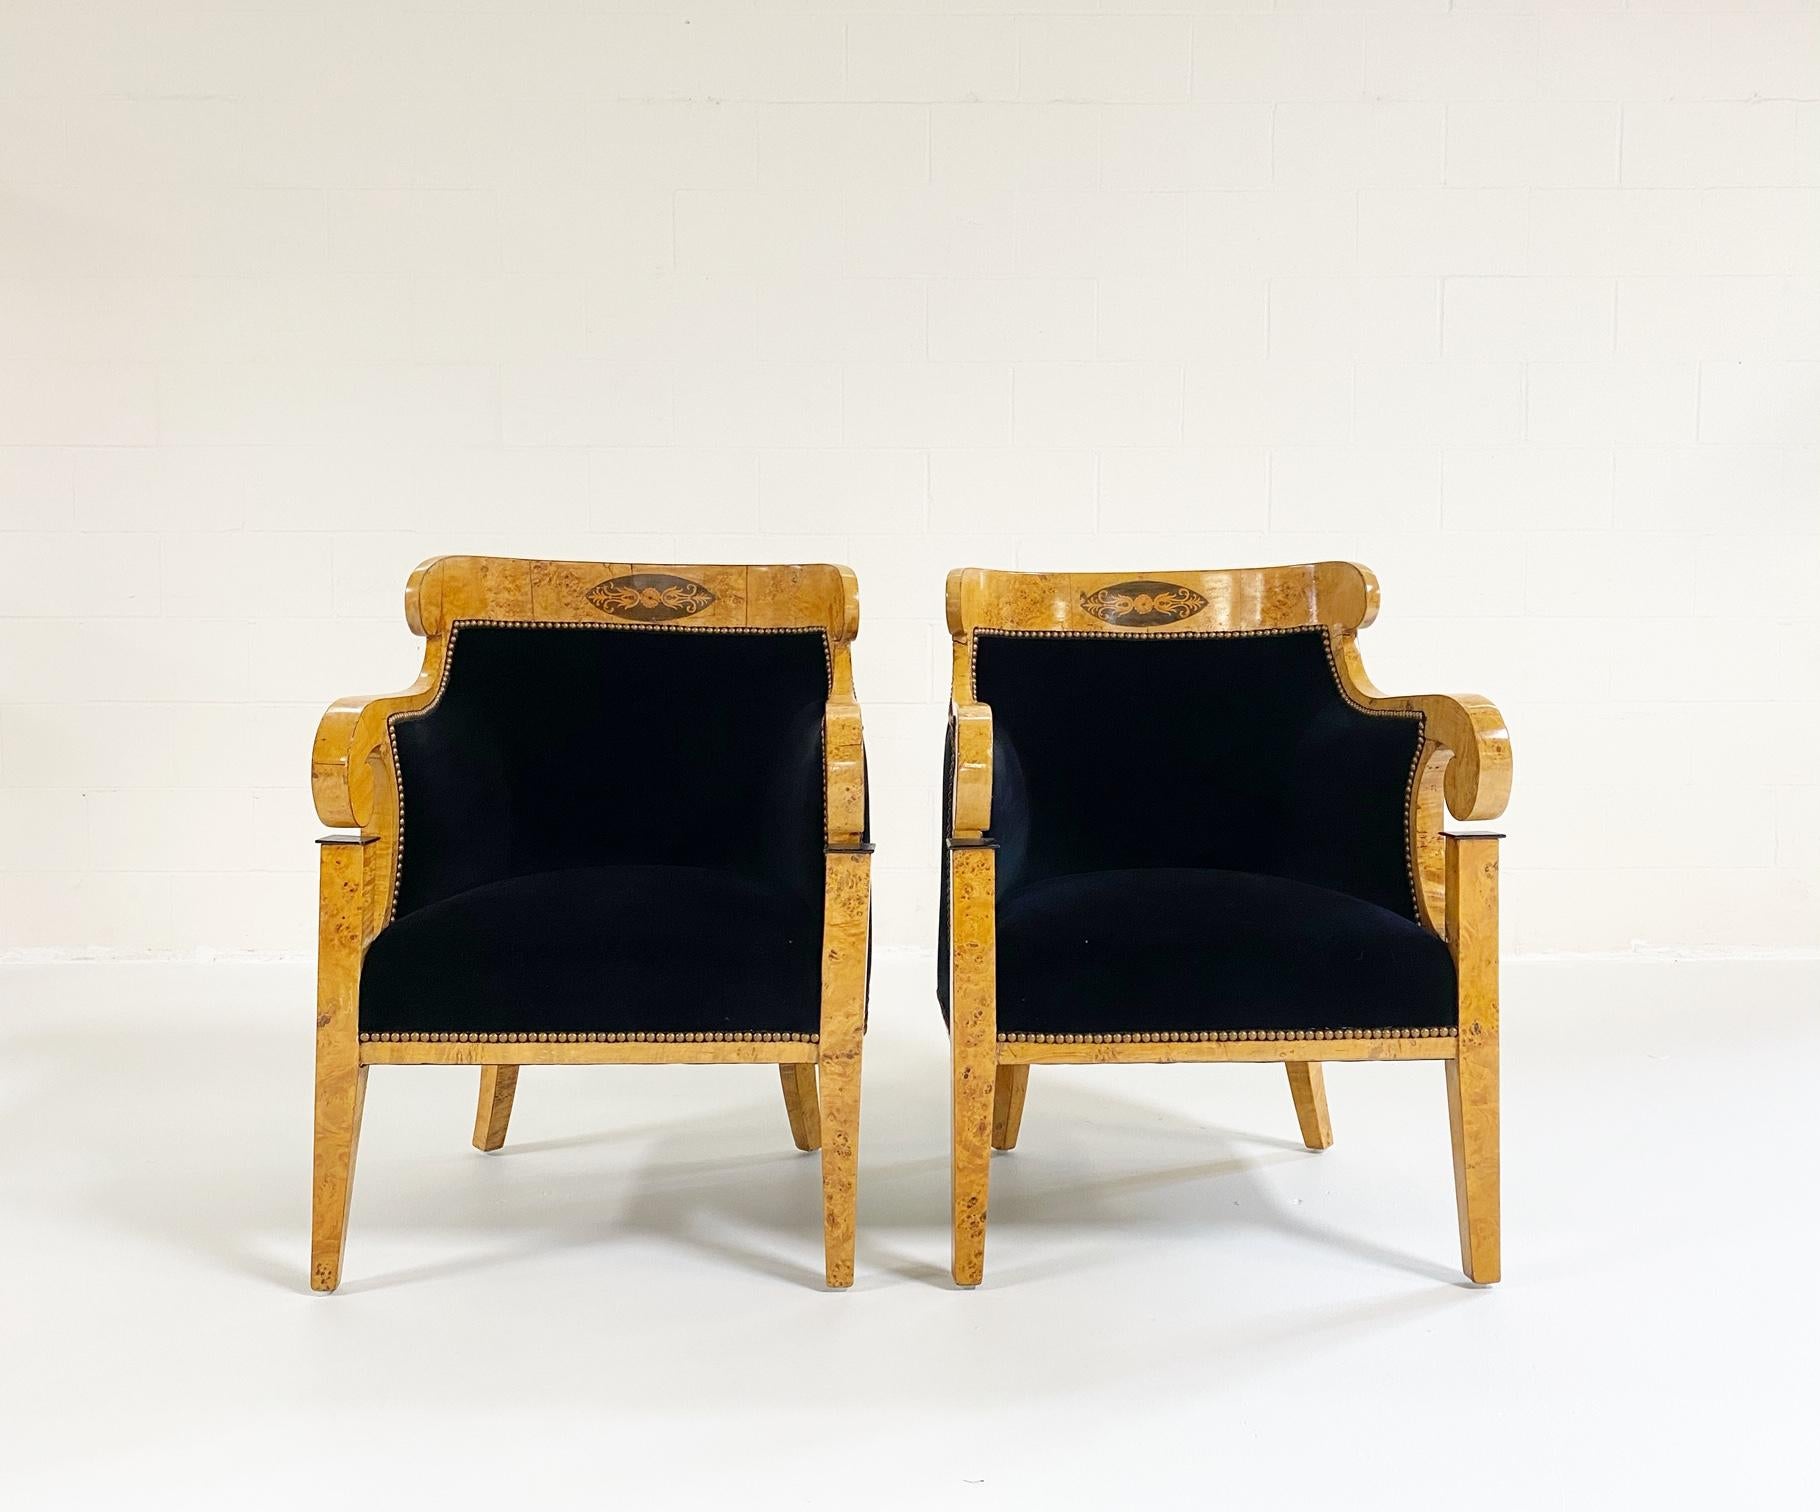 Beautiful pair of Biedermeier armchairs, newly restored in rose Uniacke onyx velvet. Nailheads added to surround. Each with a concave top rail with an oval inlaid panel, joined to closed arms with scroll ends, raised on tapering square legs